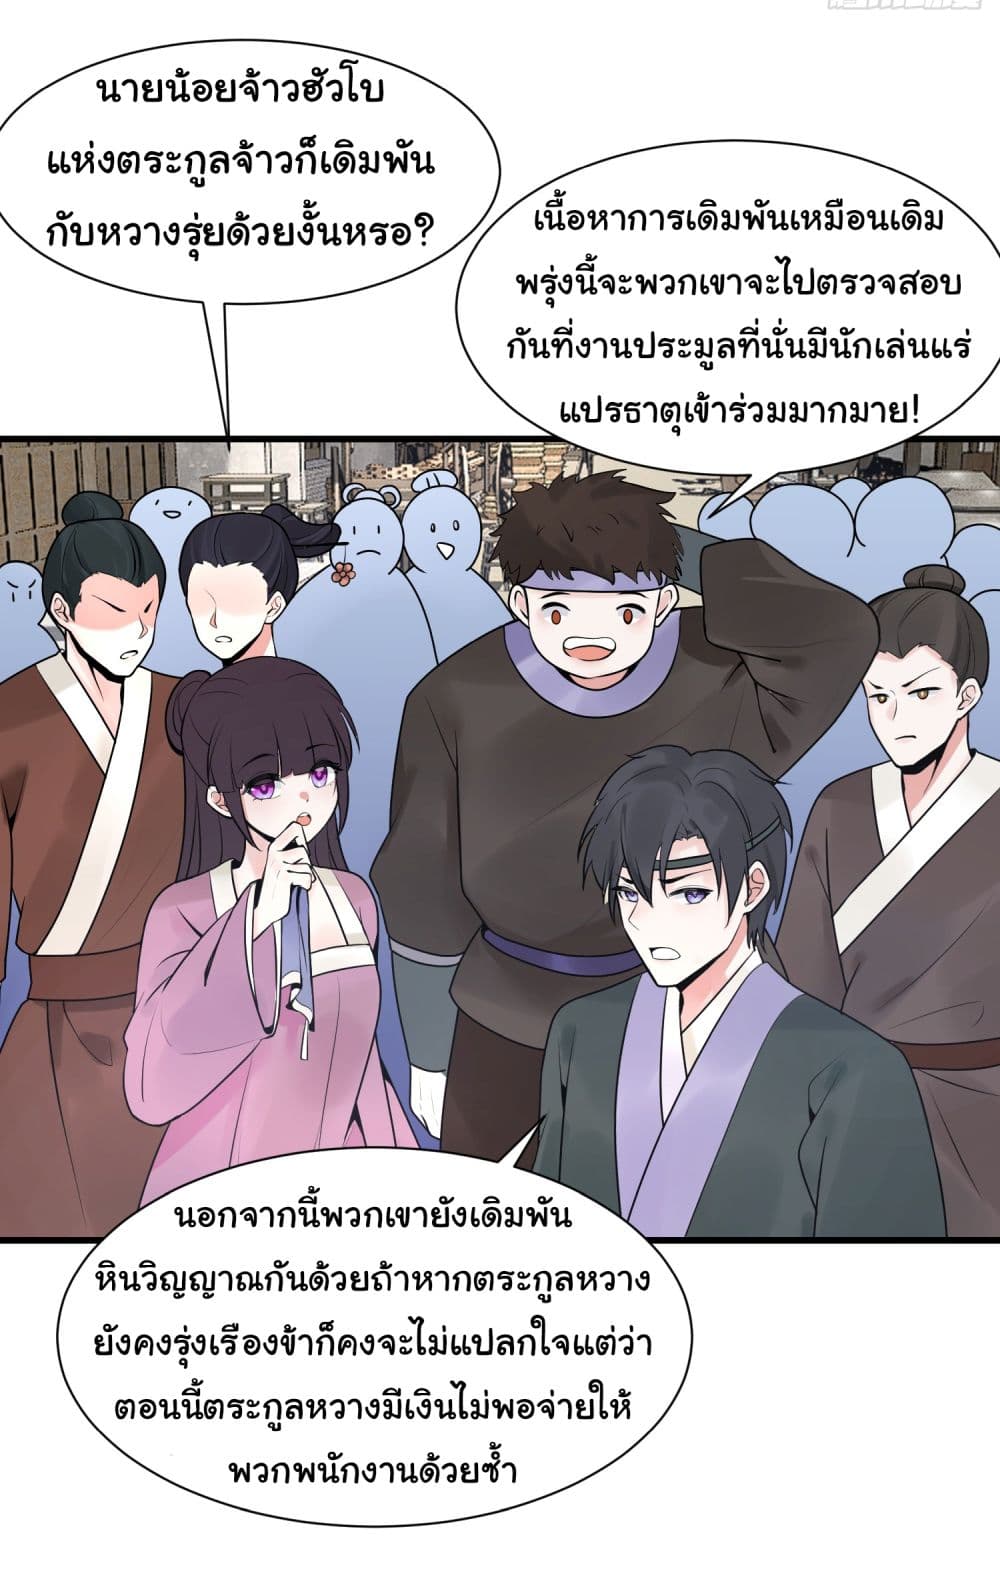 Rebirth of an Immortal Cultivator from 10,000 years ago ตอนที่ 9 (15)